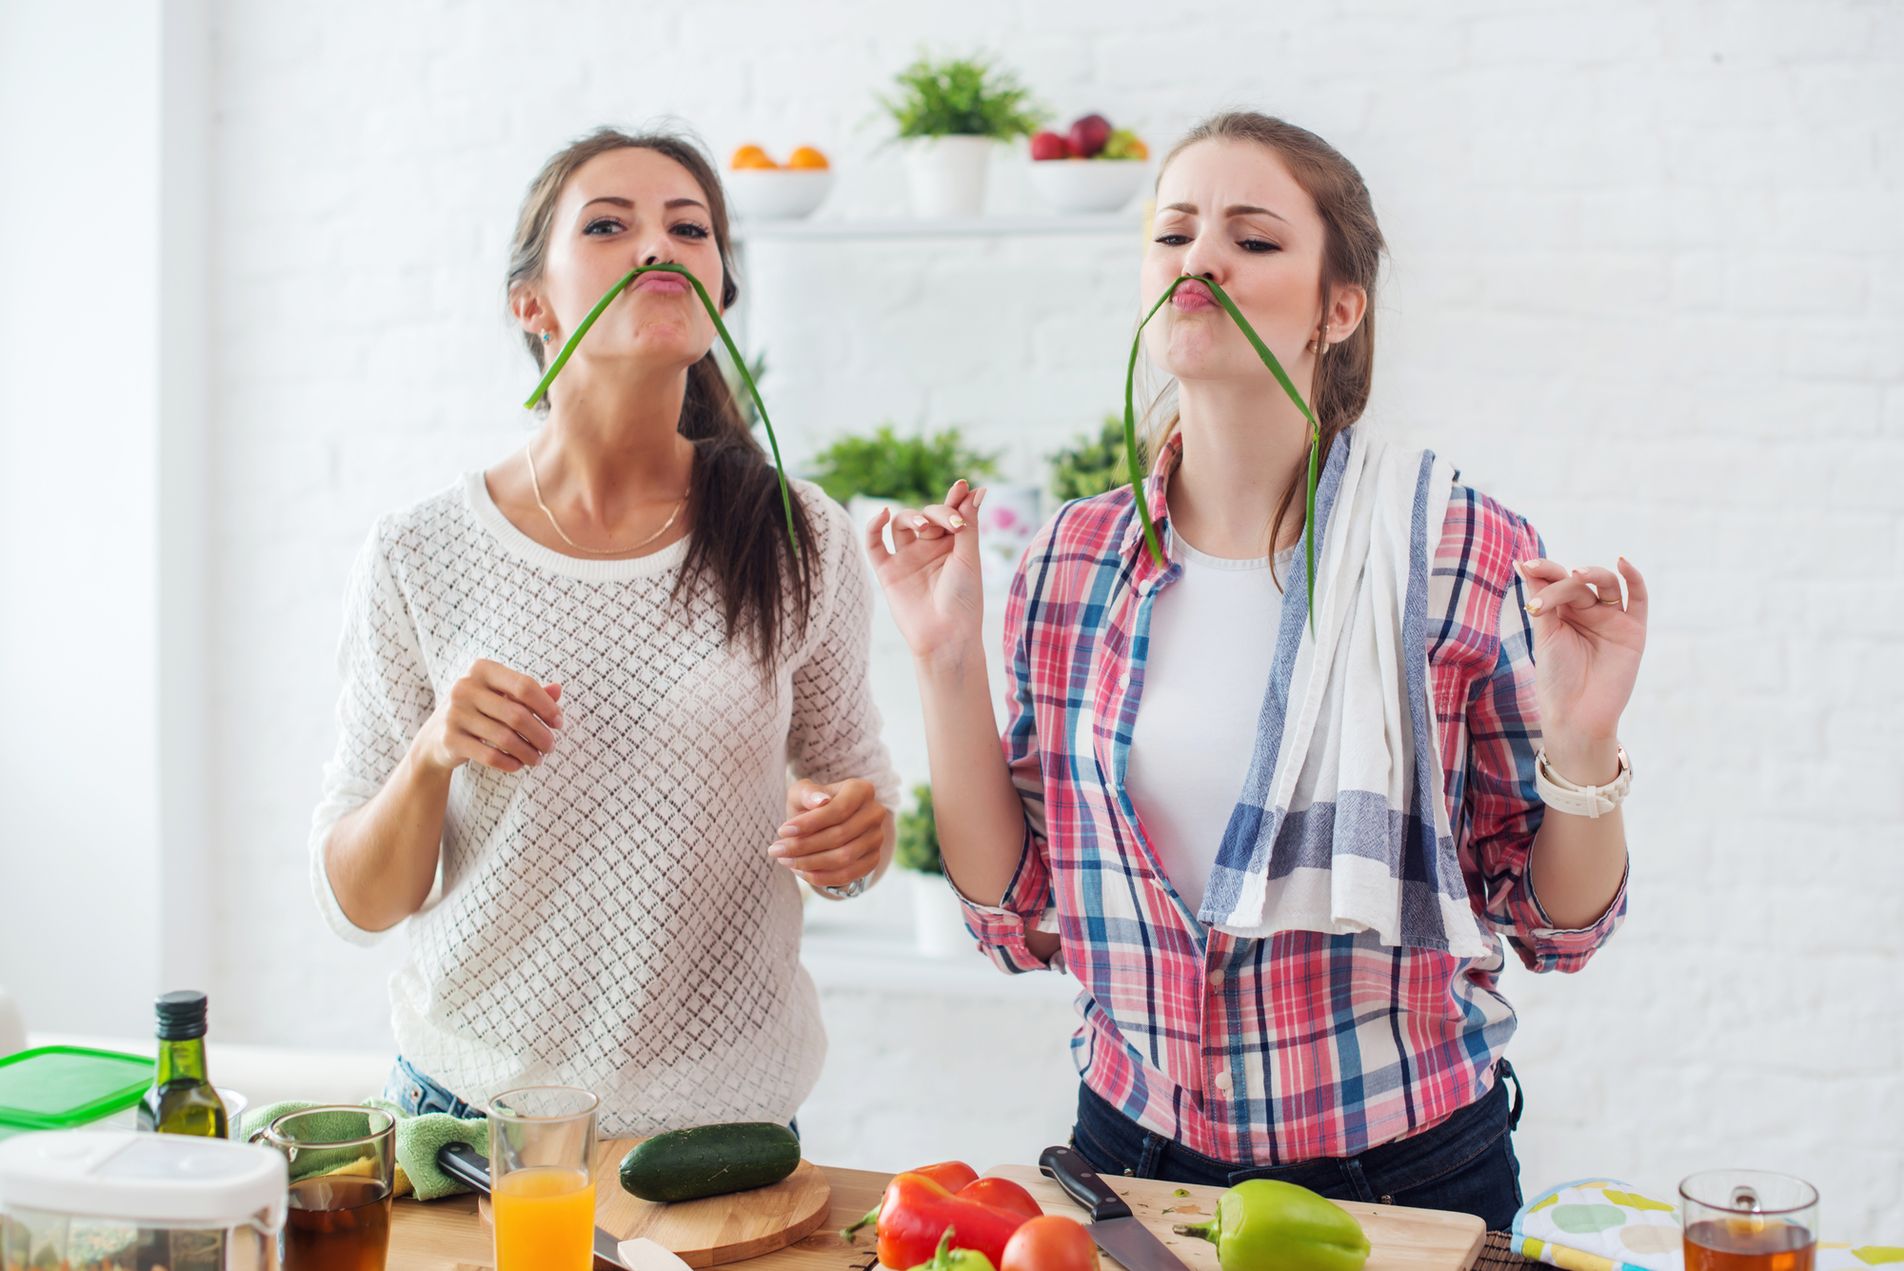 Women preparing healthy food playing with vegetables in kitchen having fun concept dieting nutrition